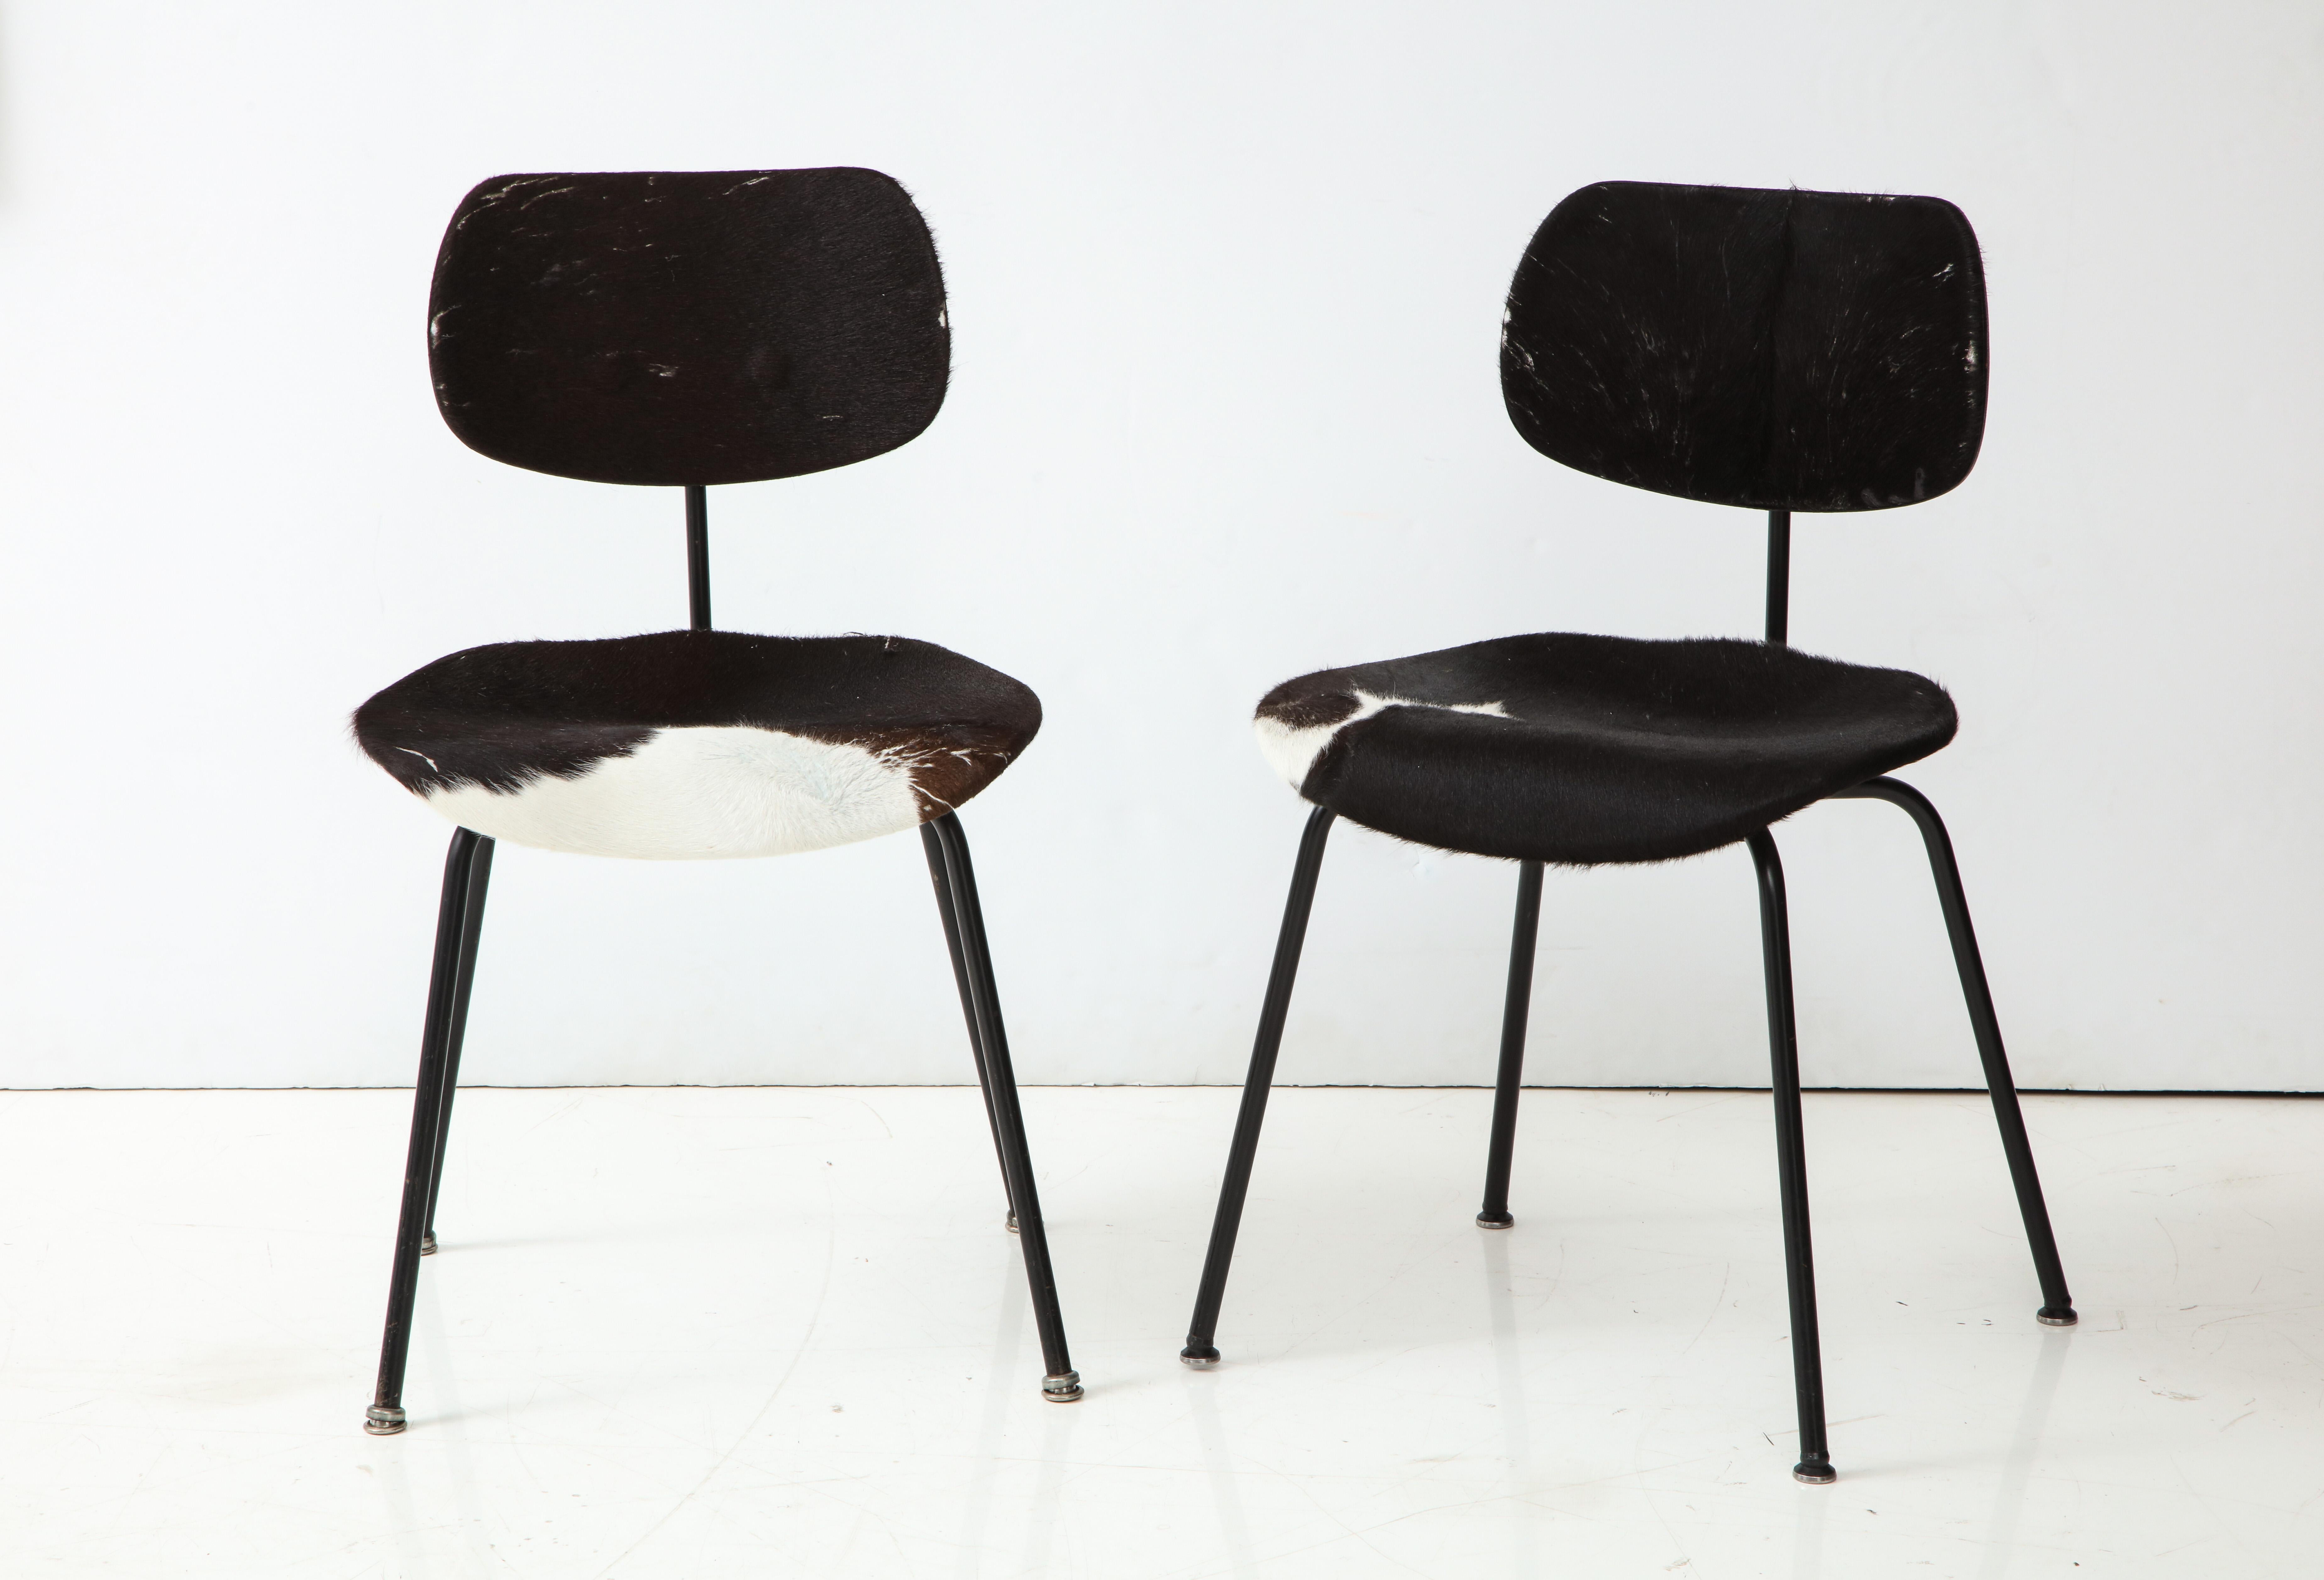 Classic pair of mid-century SE 68 chairs by German architect and designer Egon Eiermann. 

Clean, modernist design consists of a tubular metal frame, curved seat and backrest, as well as original black and white cowhide. Maker and distributor's